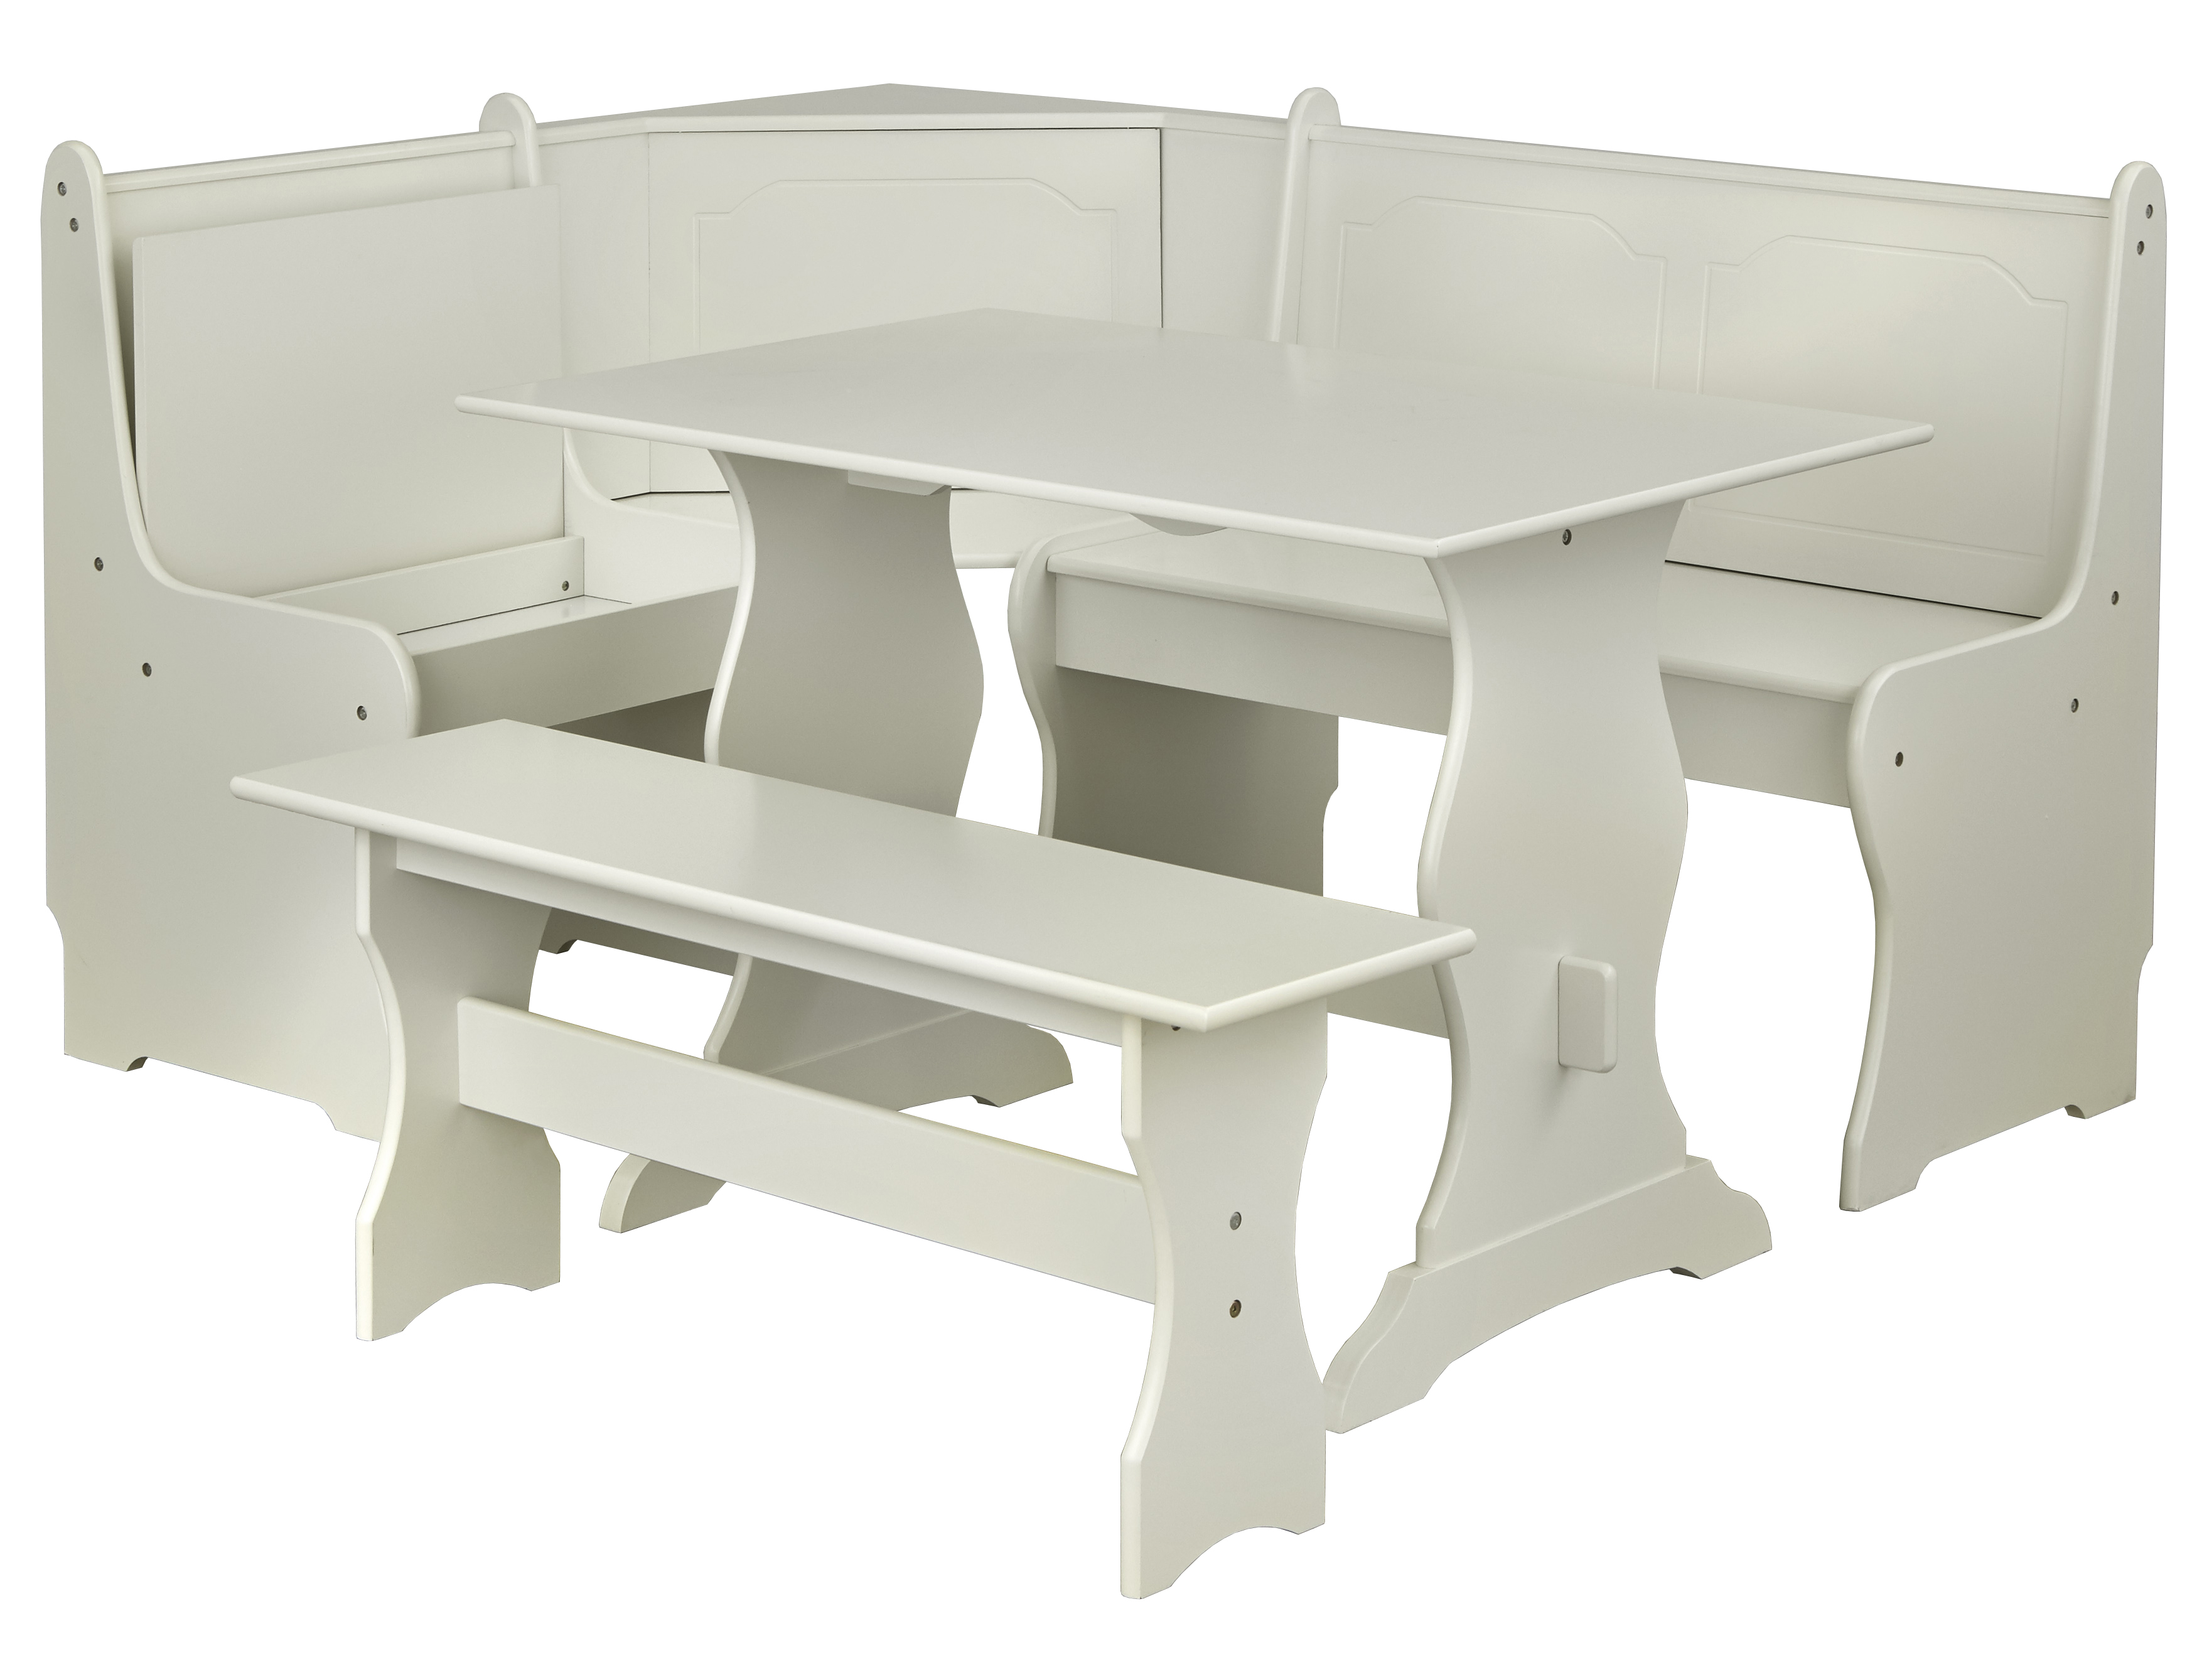 TMS Corner Reversible Dining Breakfast Nook with Storage, White - image 4 of 7